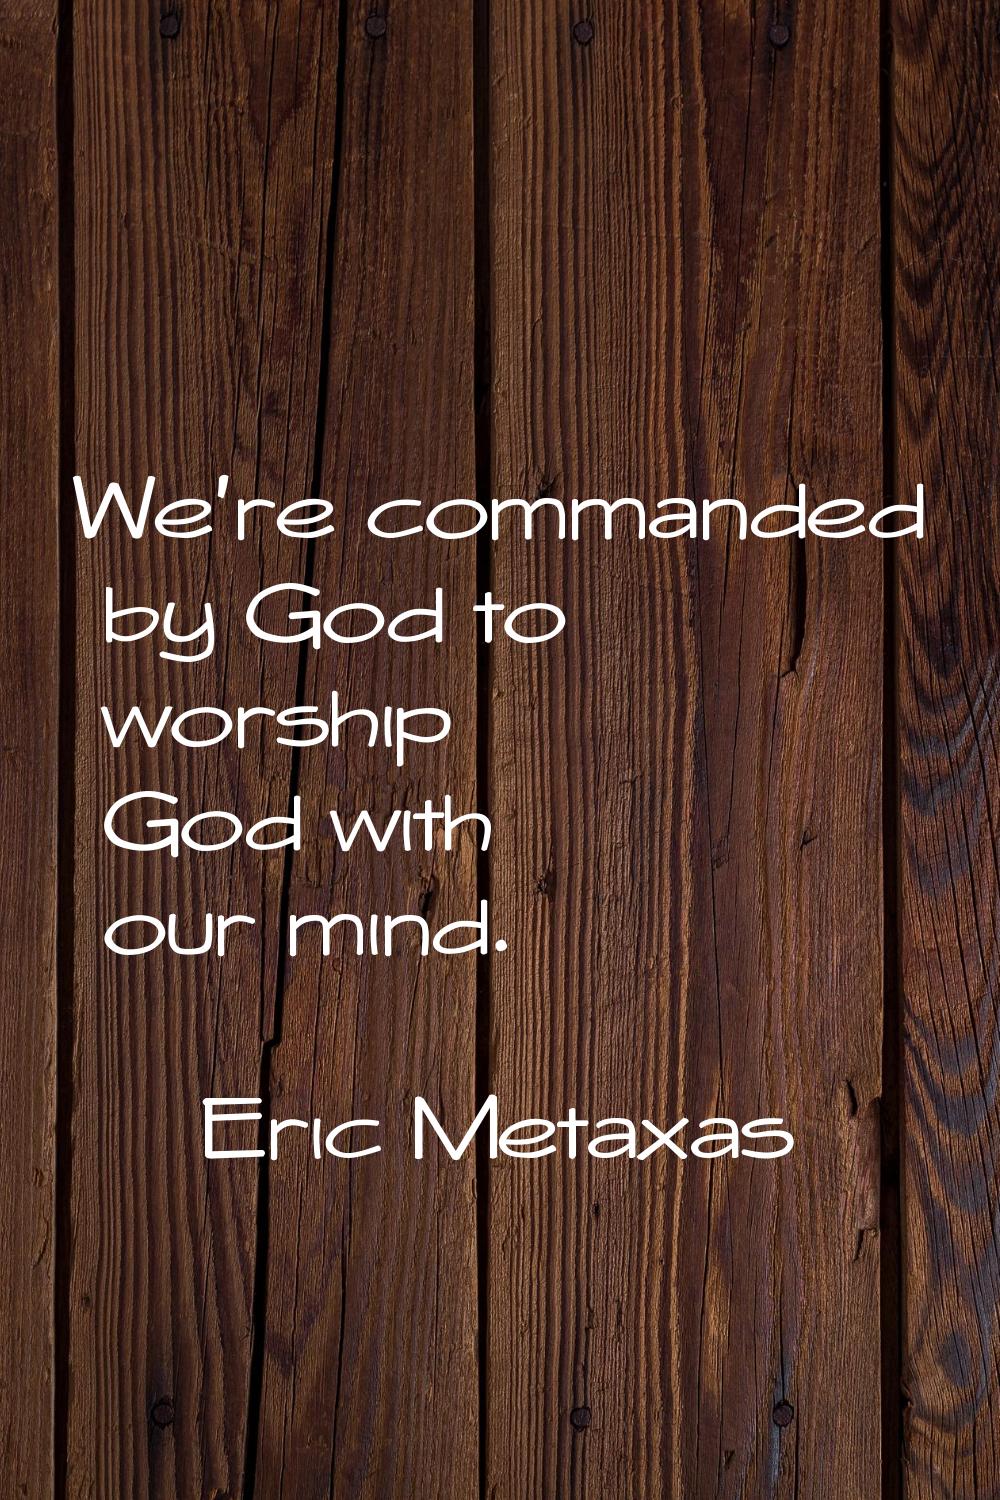 We're commanded by God to worship God with our mind.